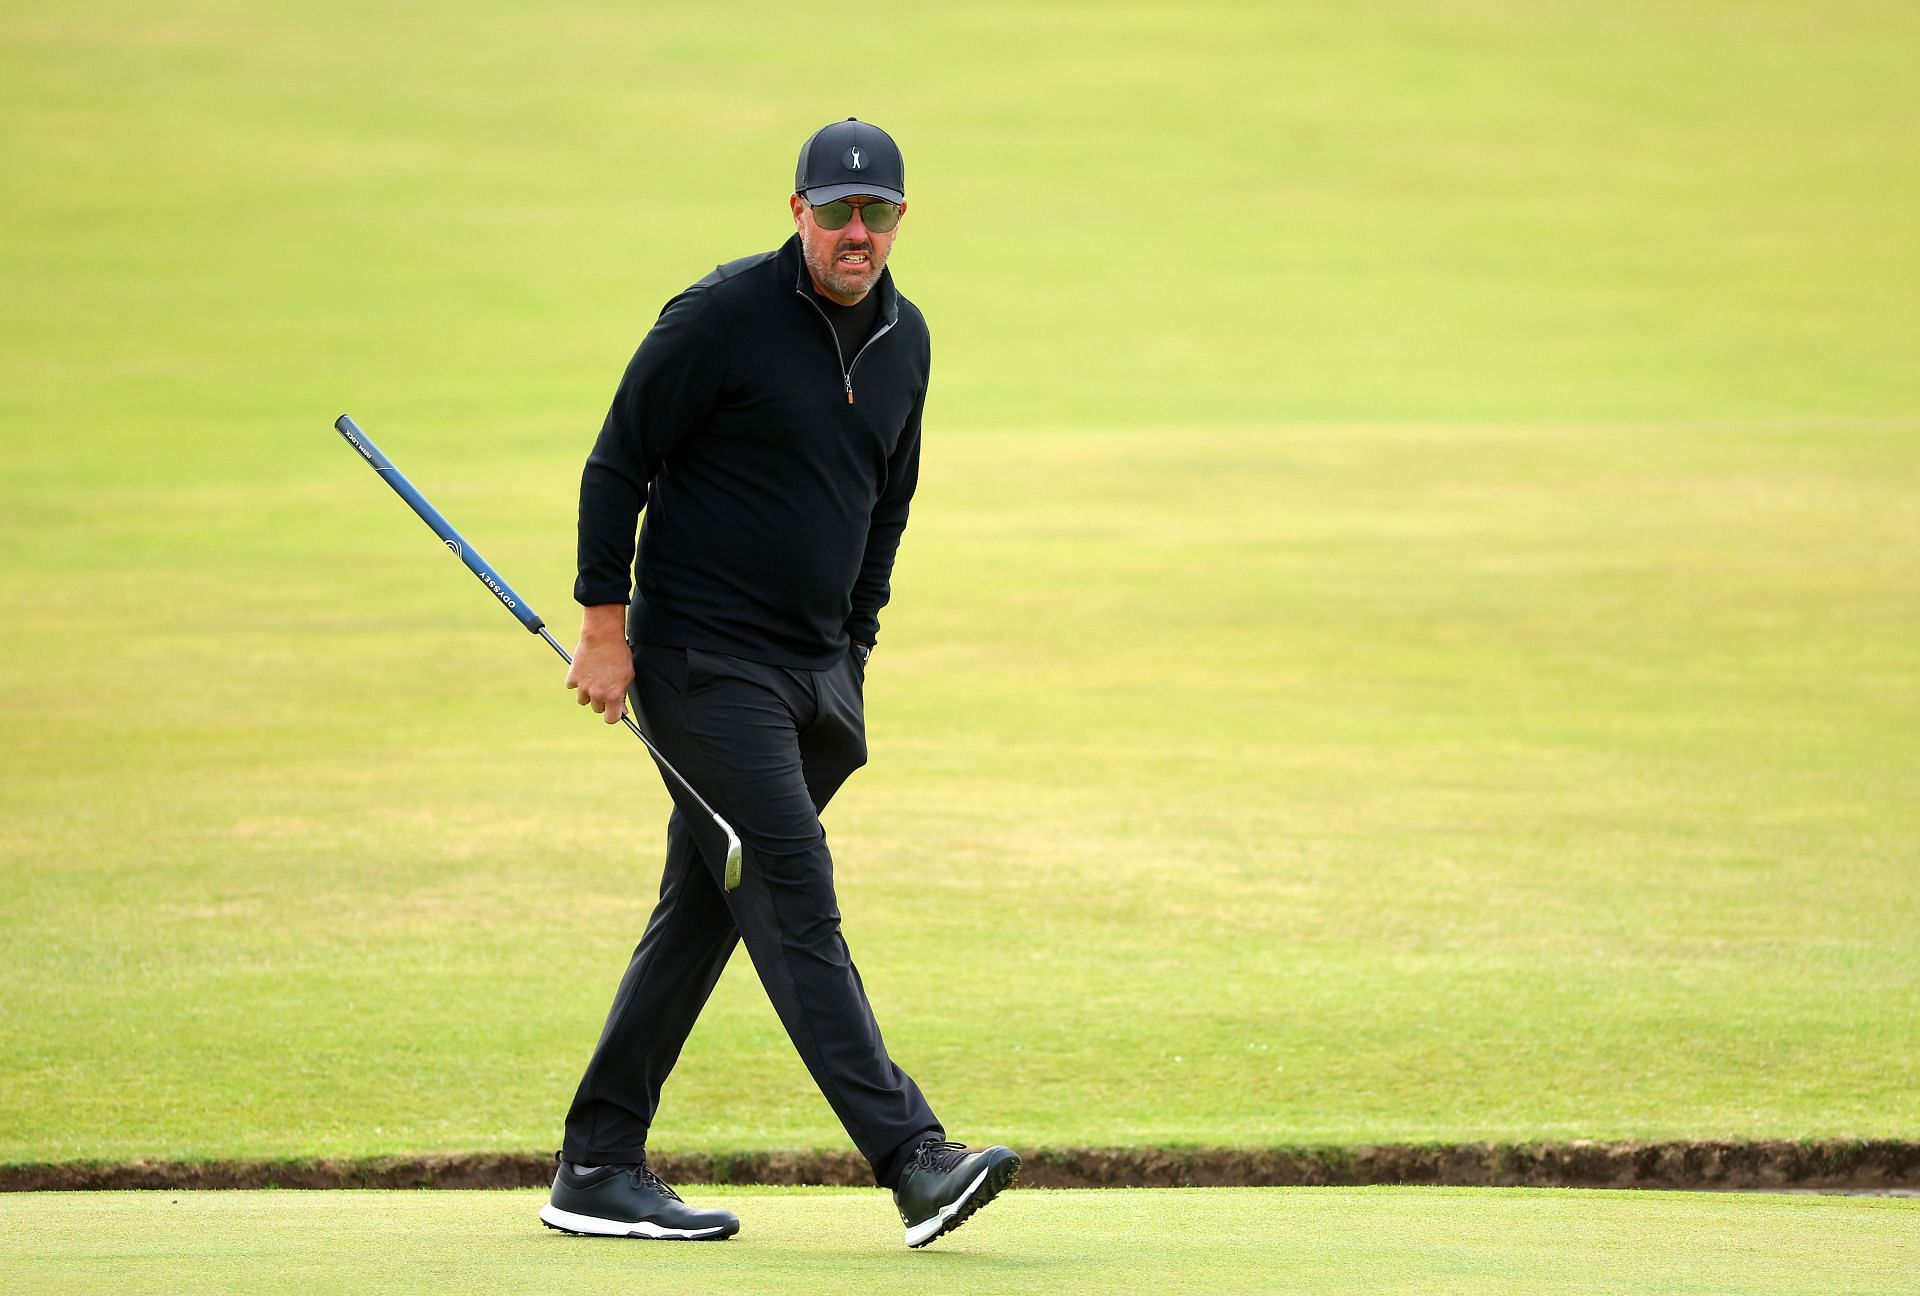 Phil Mickelson at The 150th Open - Day One (Image via Kevin C. Cox/Getty Images)